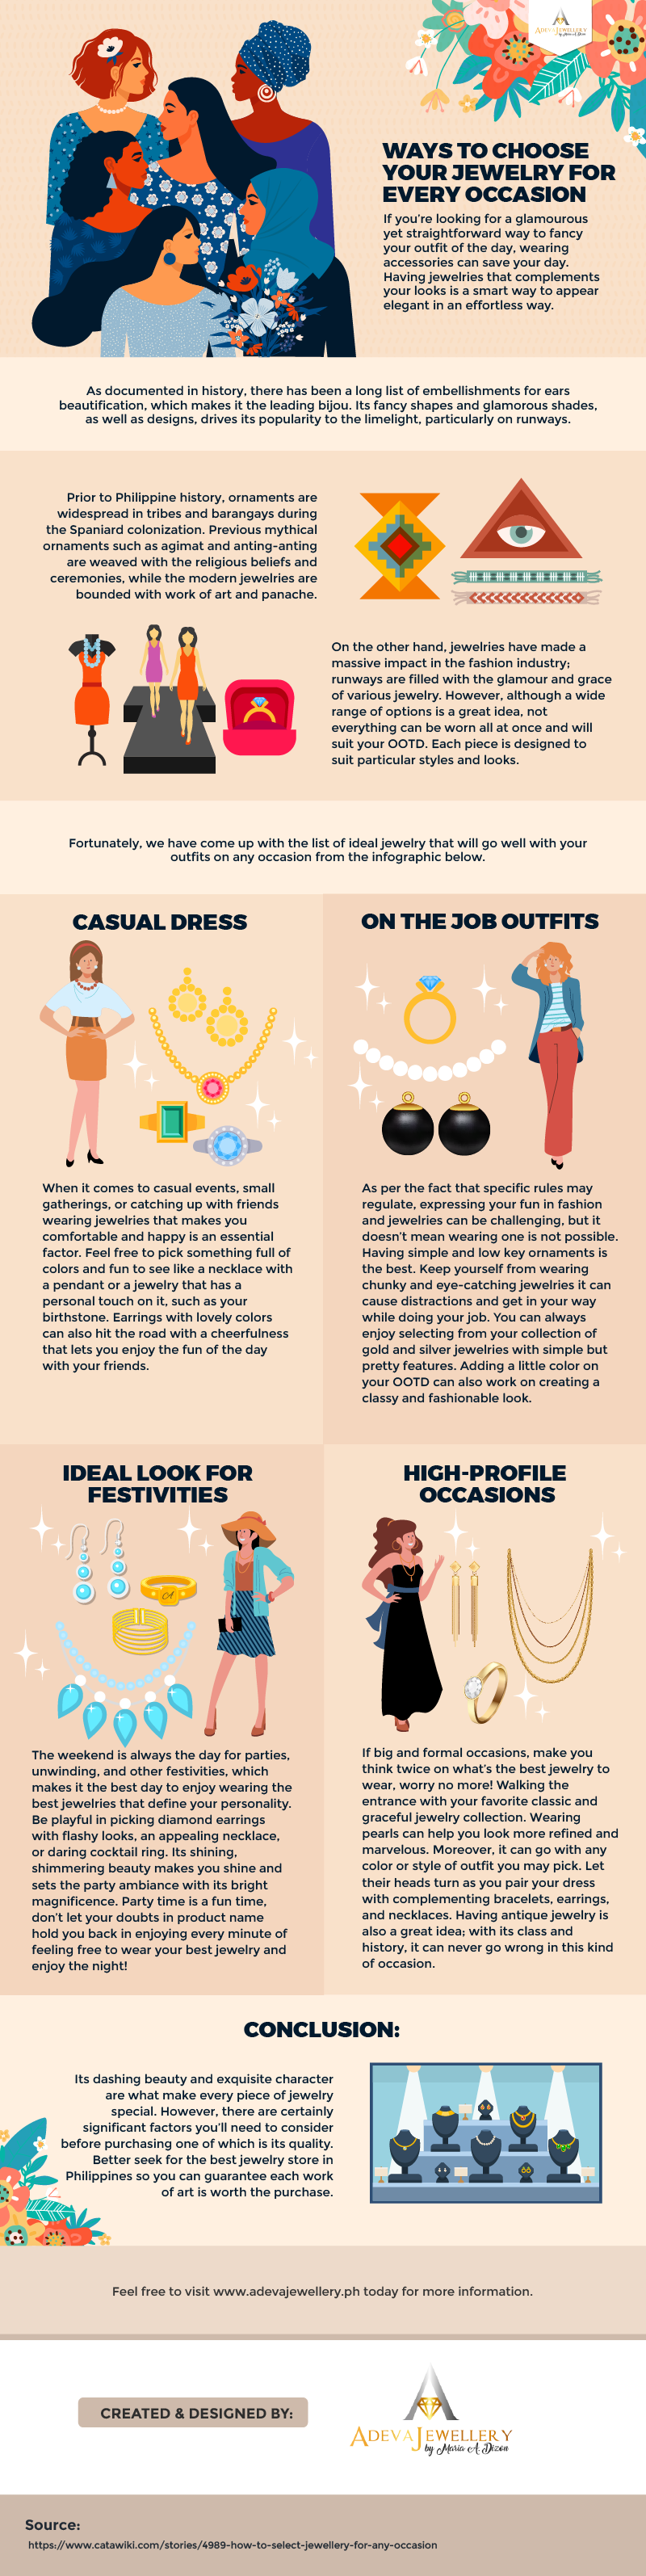 Ways to Choose Your Jewelry for Every Occasion #Infographic